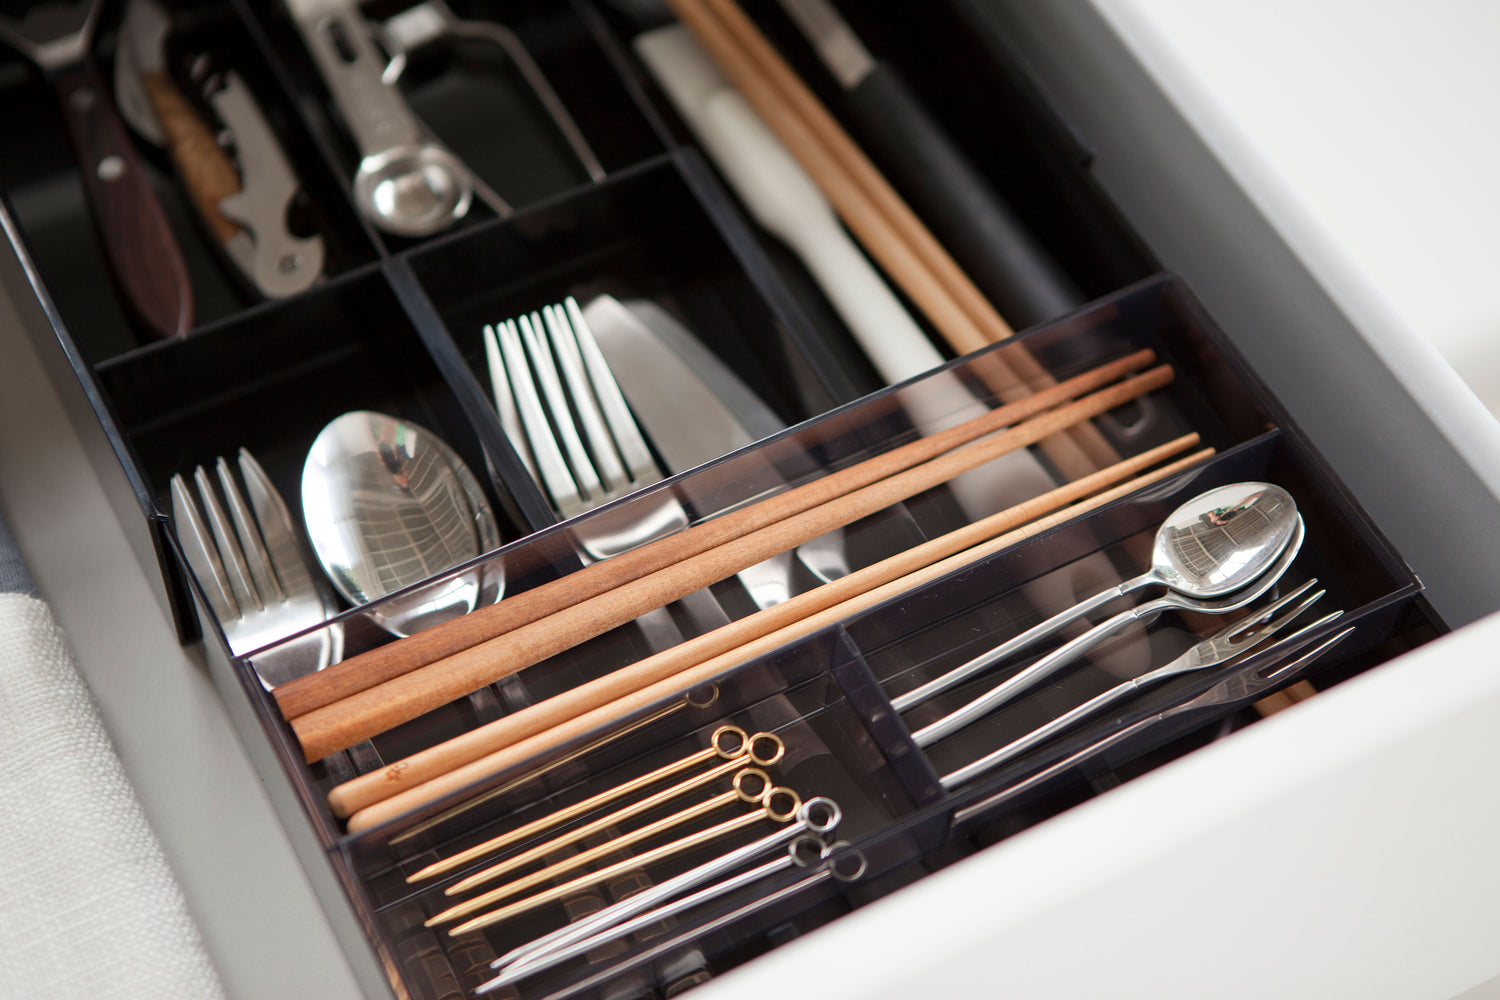 View 25 - Close up aerial view of black Expandable Drawer Organizer holding utensils by Yamazaki Home.